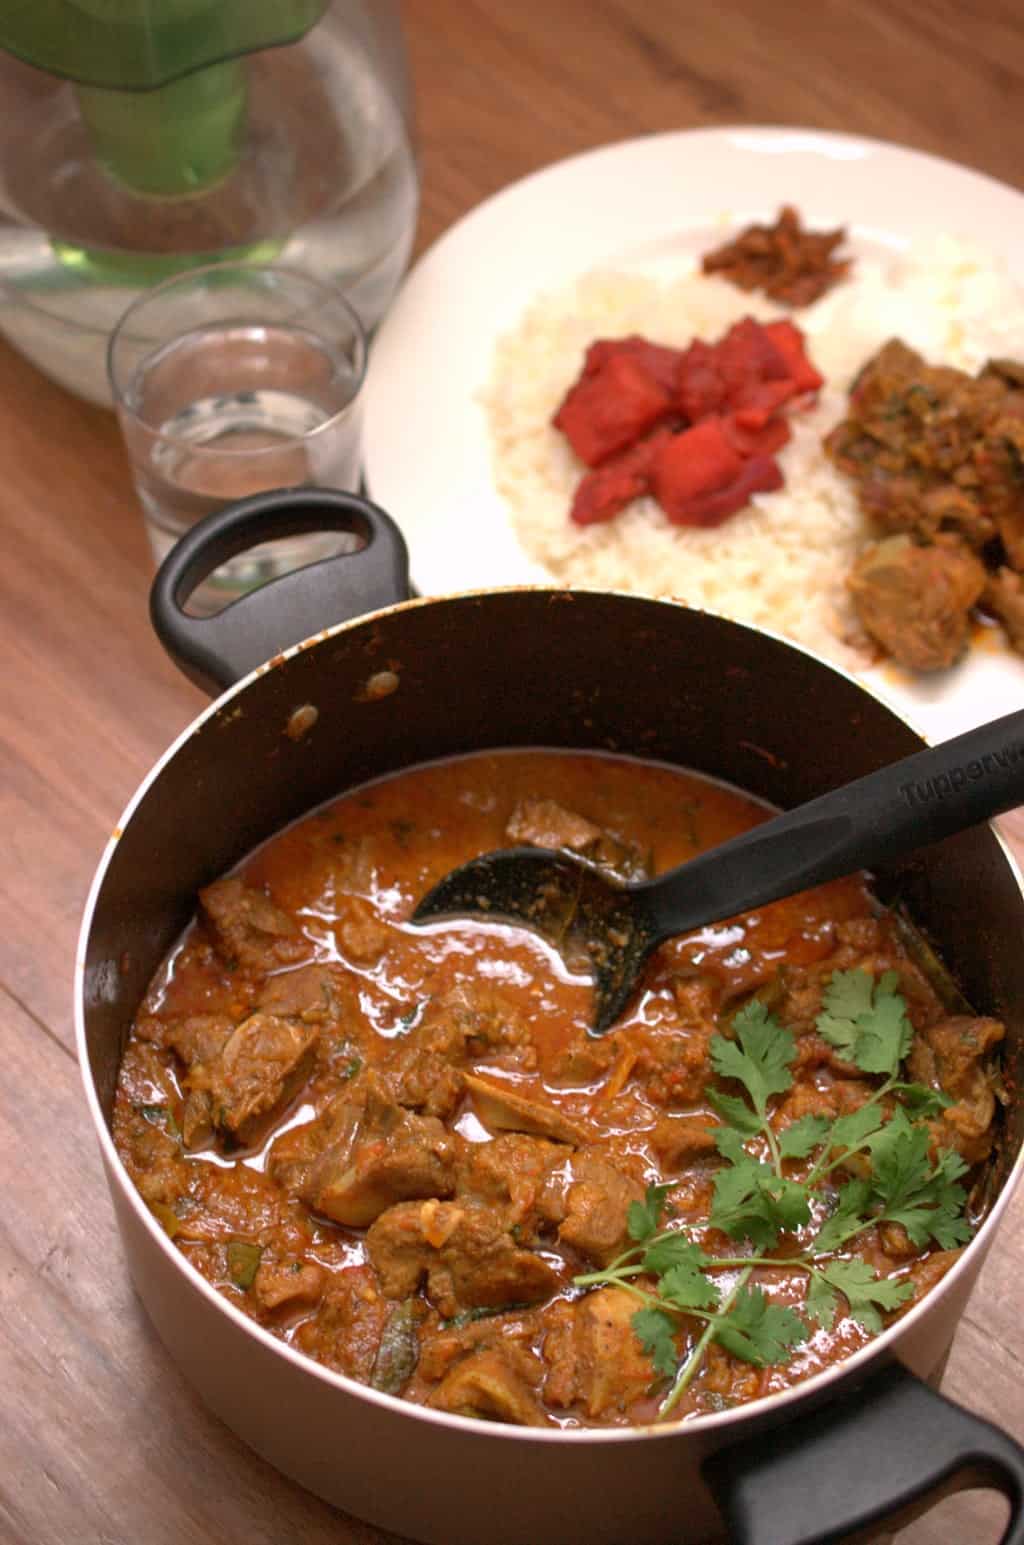 Easy, spicy Kerala mutton curry that can be prepared in no time. This nadan mutton curry goes well with porotta, any sort of rice variants ( ghee rice, pulao, normal rice) and any Indian bread.